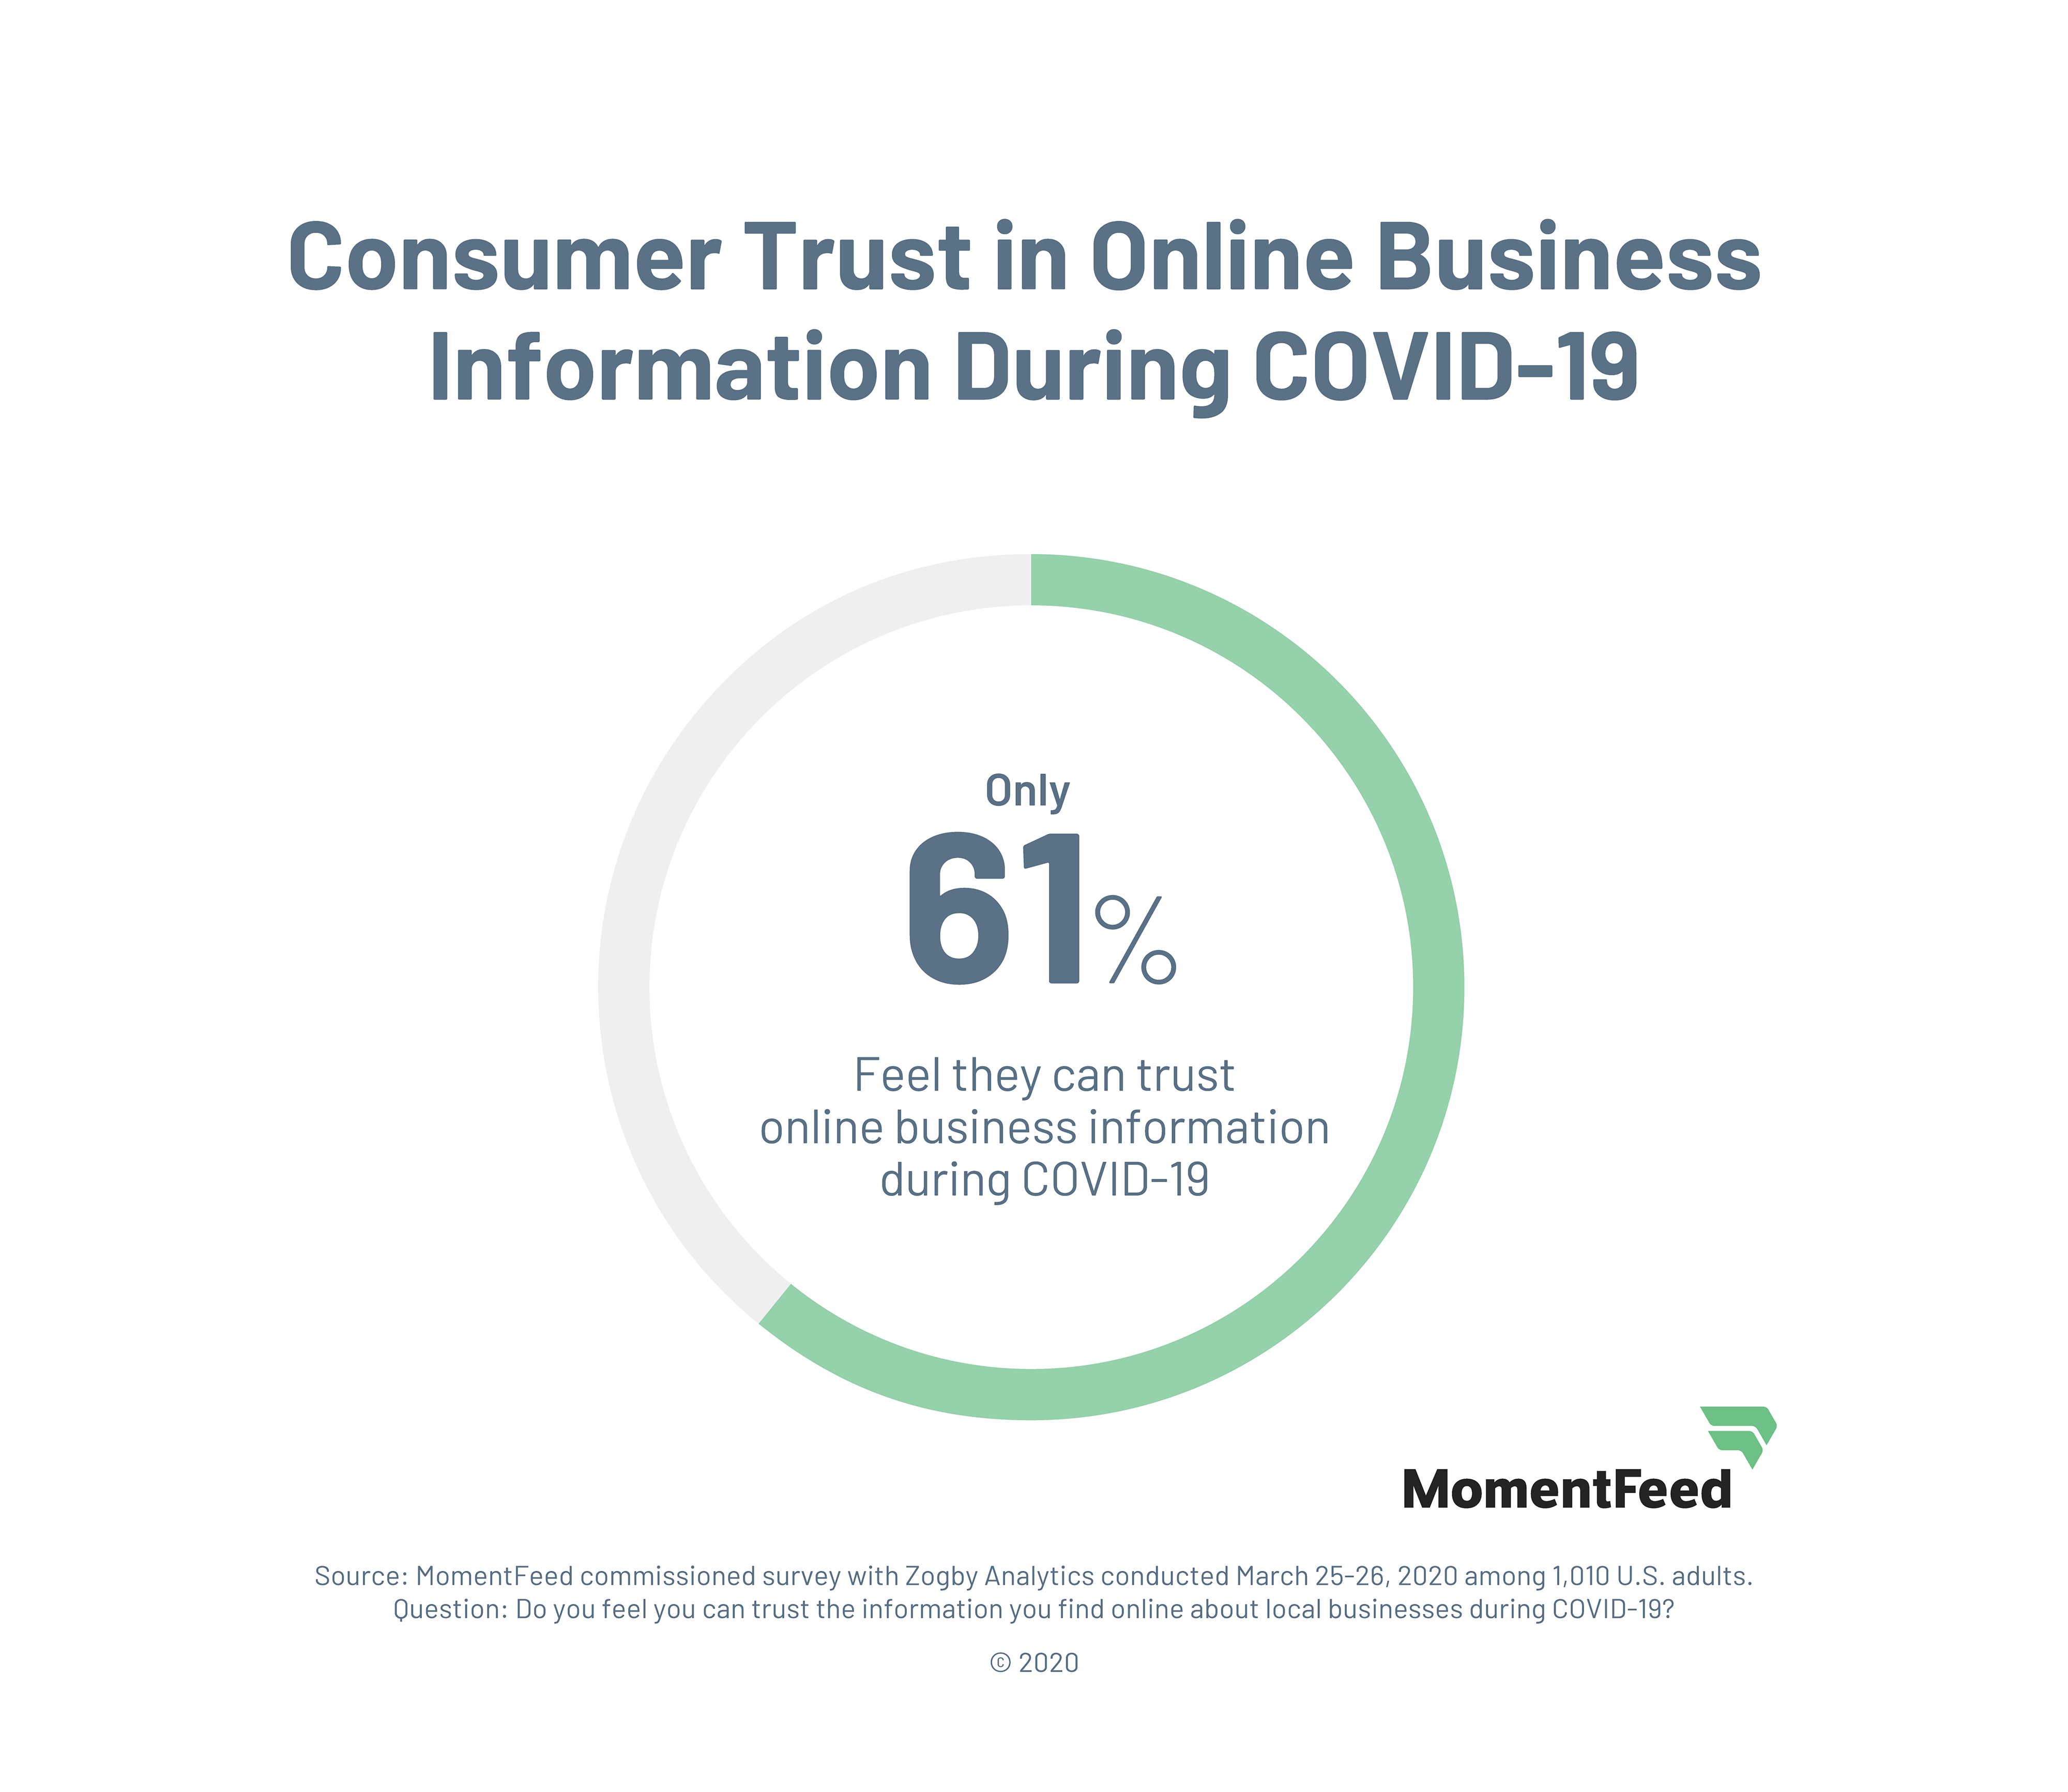 MomentFeed survey finds that only 61% of consumers trust information they find about local businesses online.